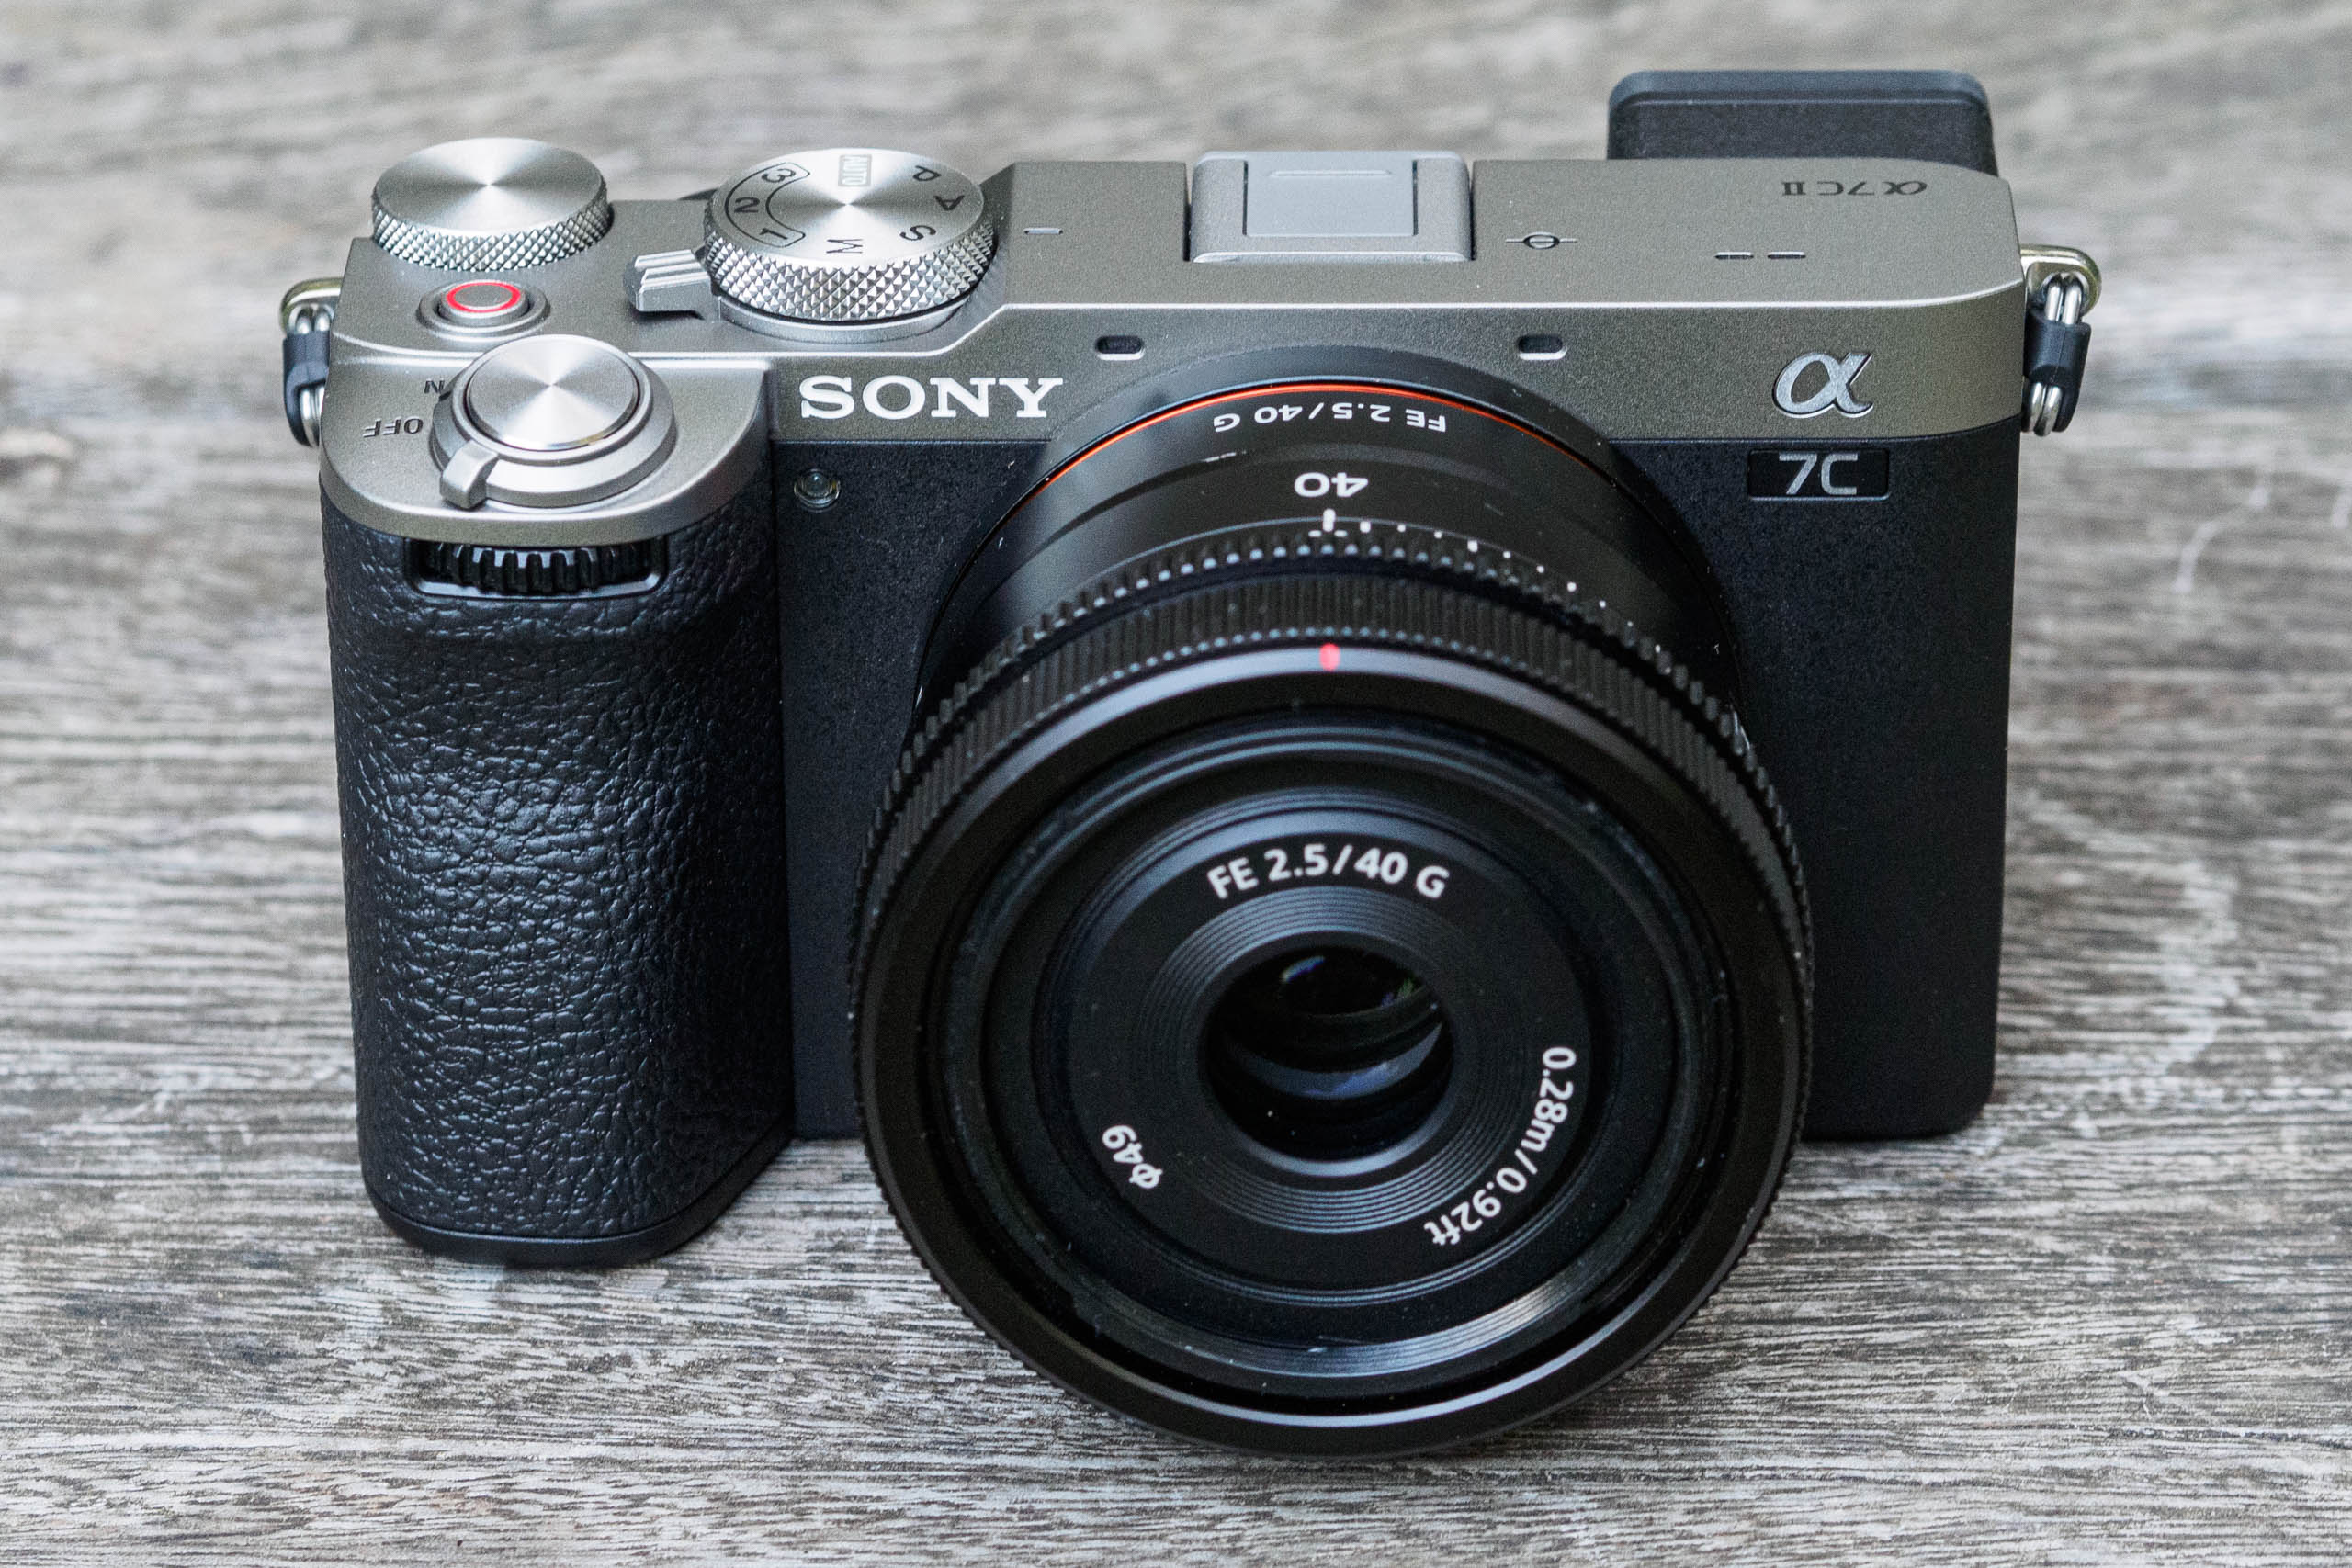 Sony Alpha 7 II Review: Advanced Camera Technology at a Price